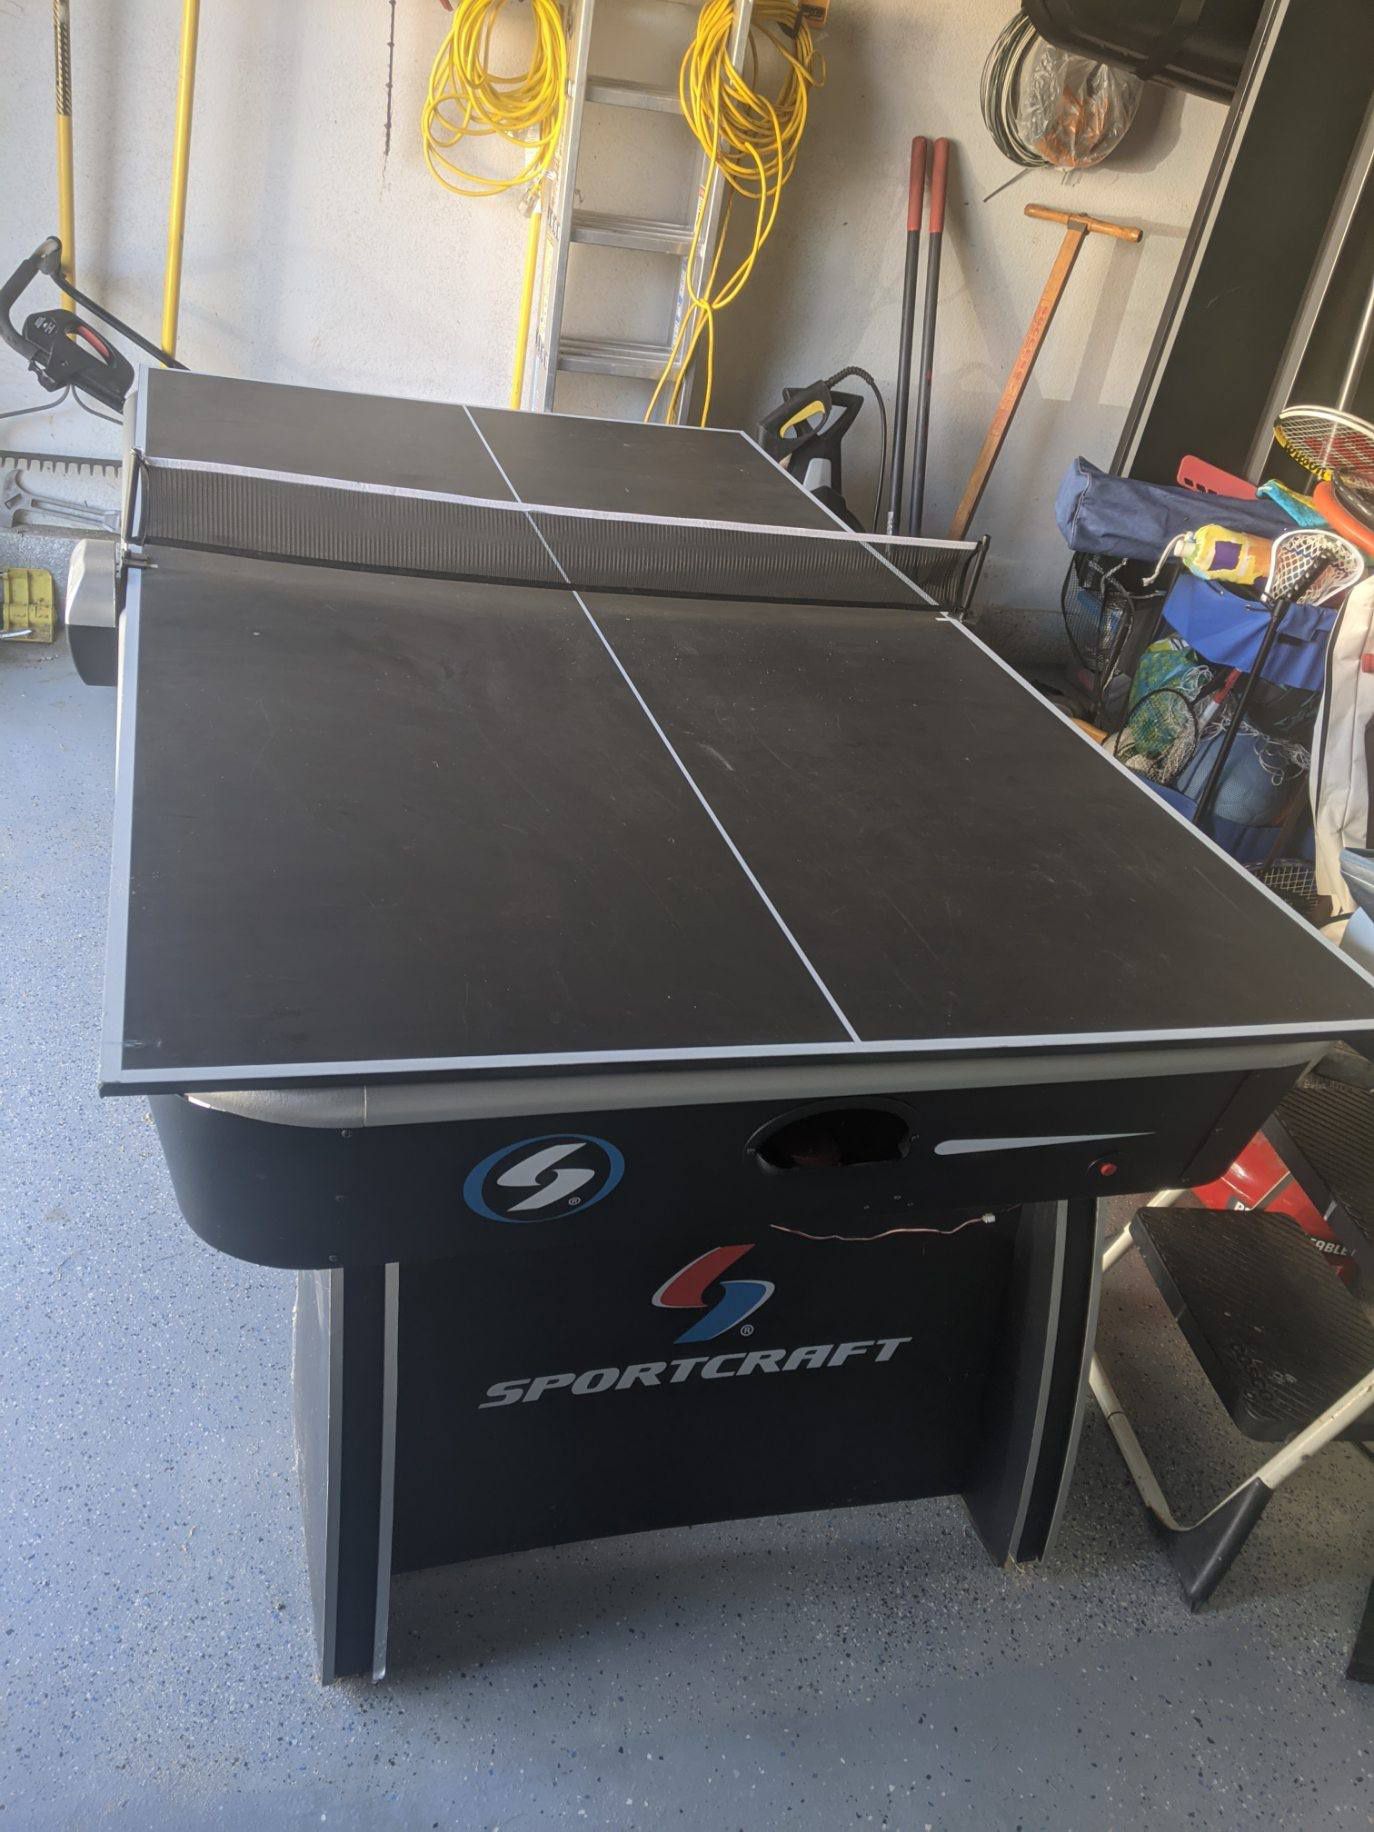 2 in 1 game table, air powered hockey table with table tennis top